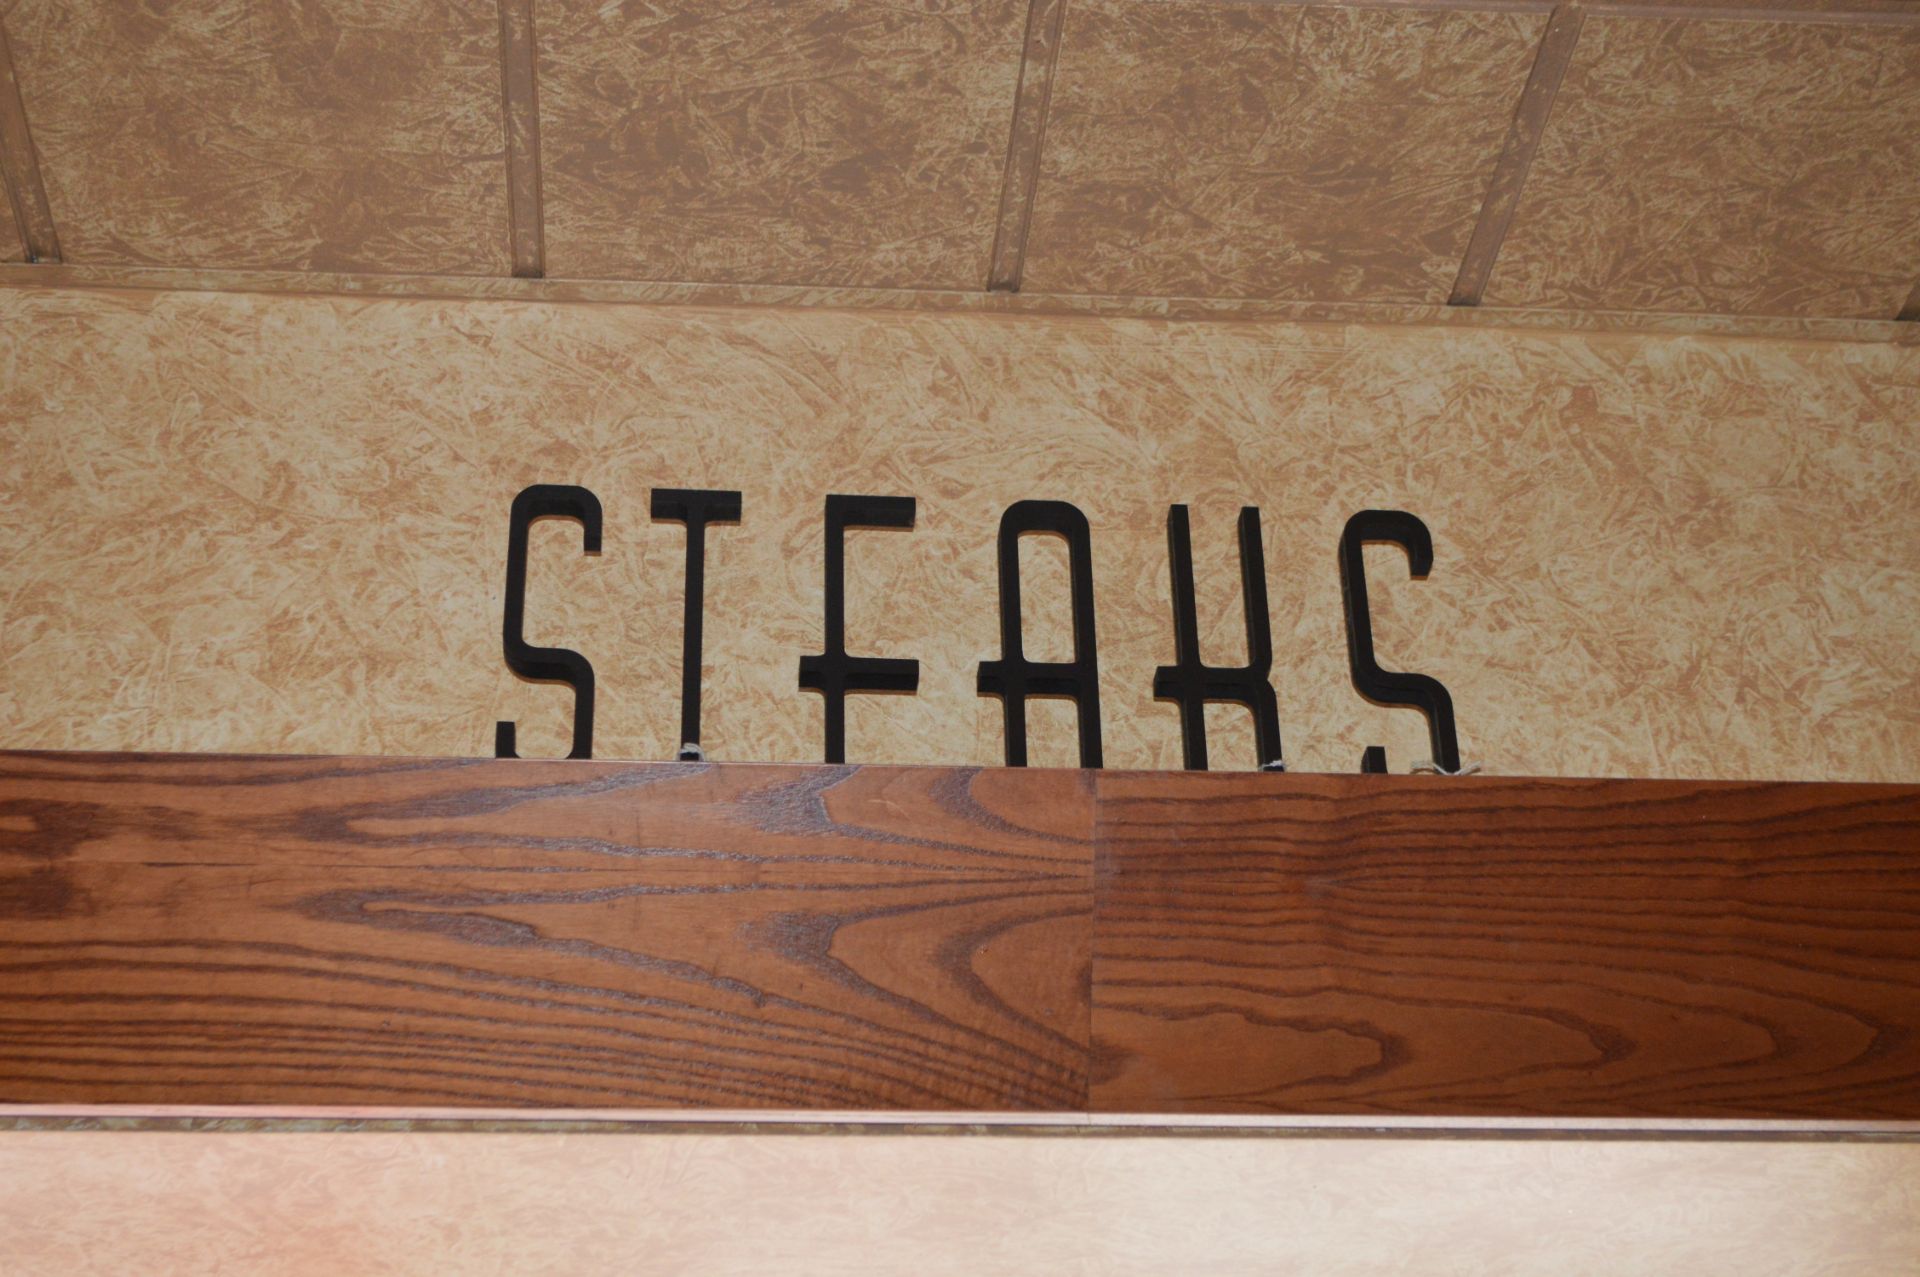 40 x Wooden Signs Suitable For Restaurants, Cafes, Bistros etc - Includes Grills, Amaretto, Penne, - Image 7 of 31